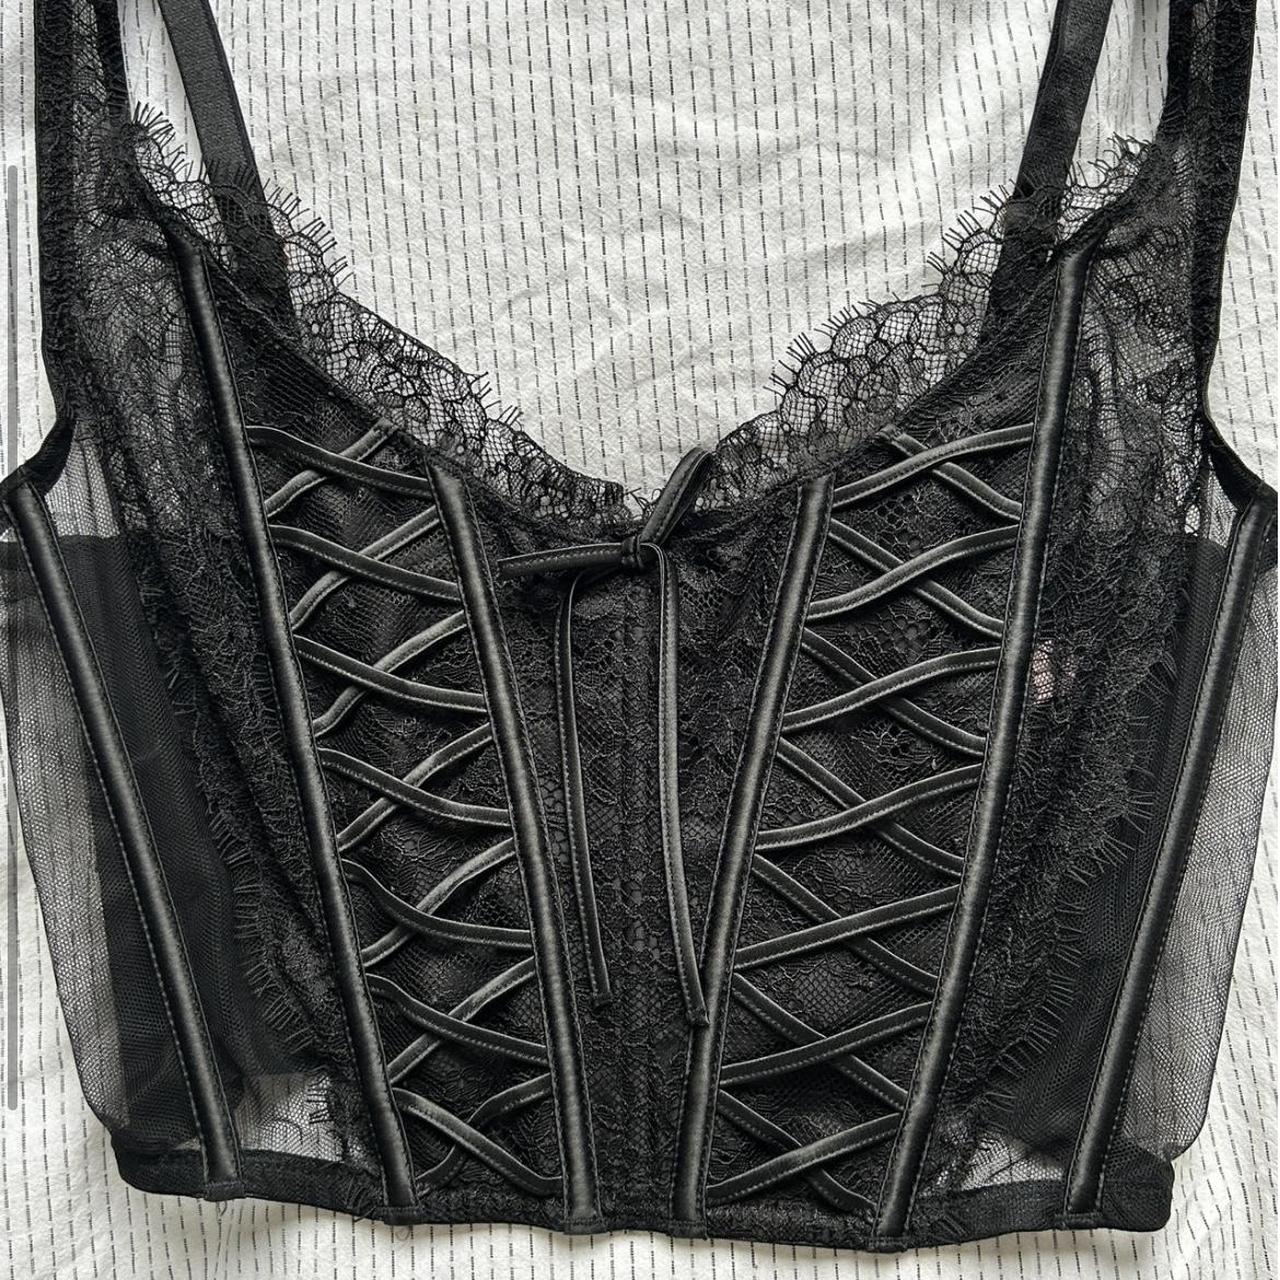 Buy Victoria's Secret Black Lace Unlined Corset Bra Top from the